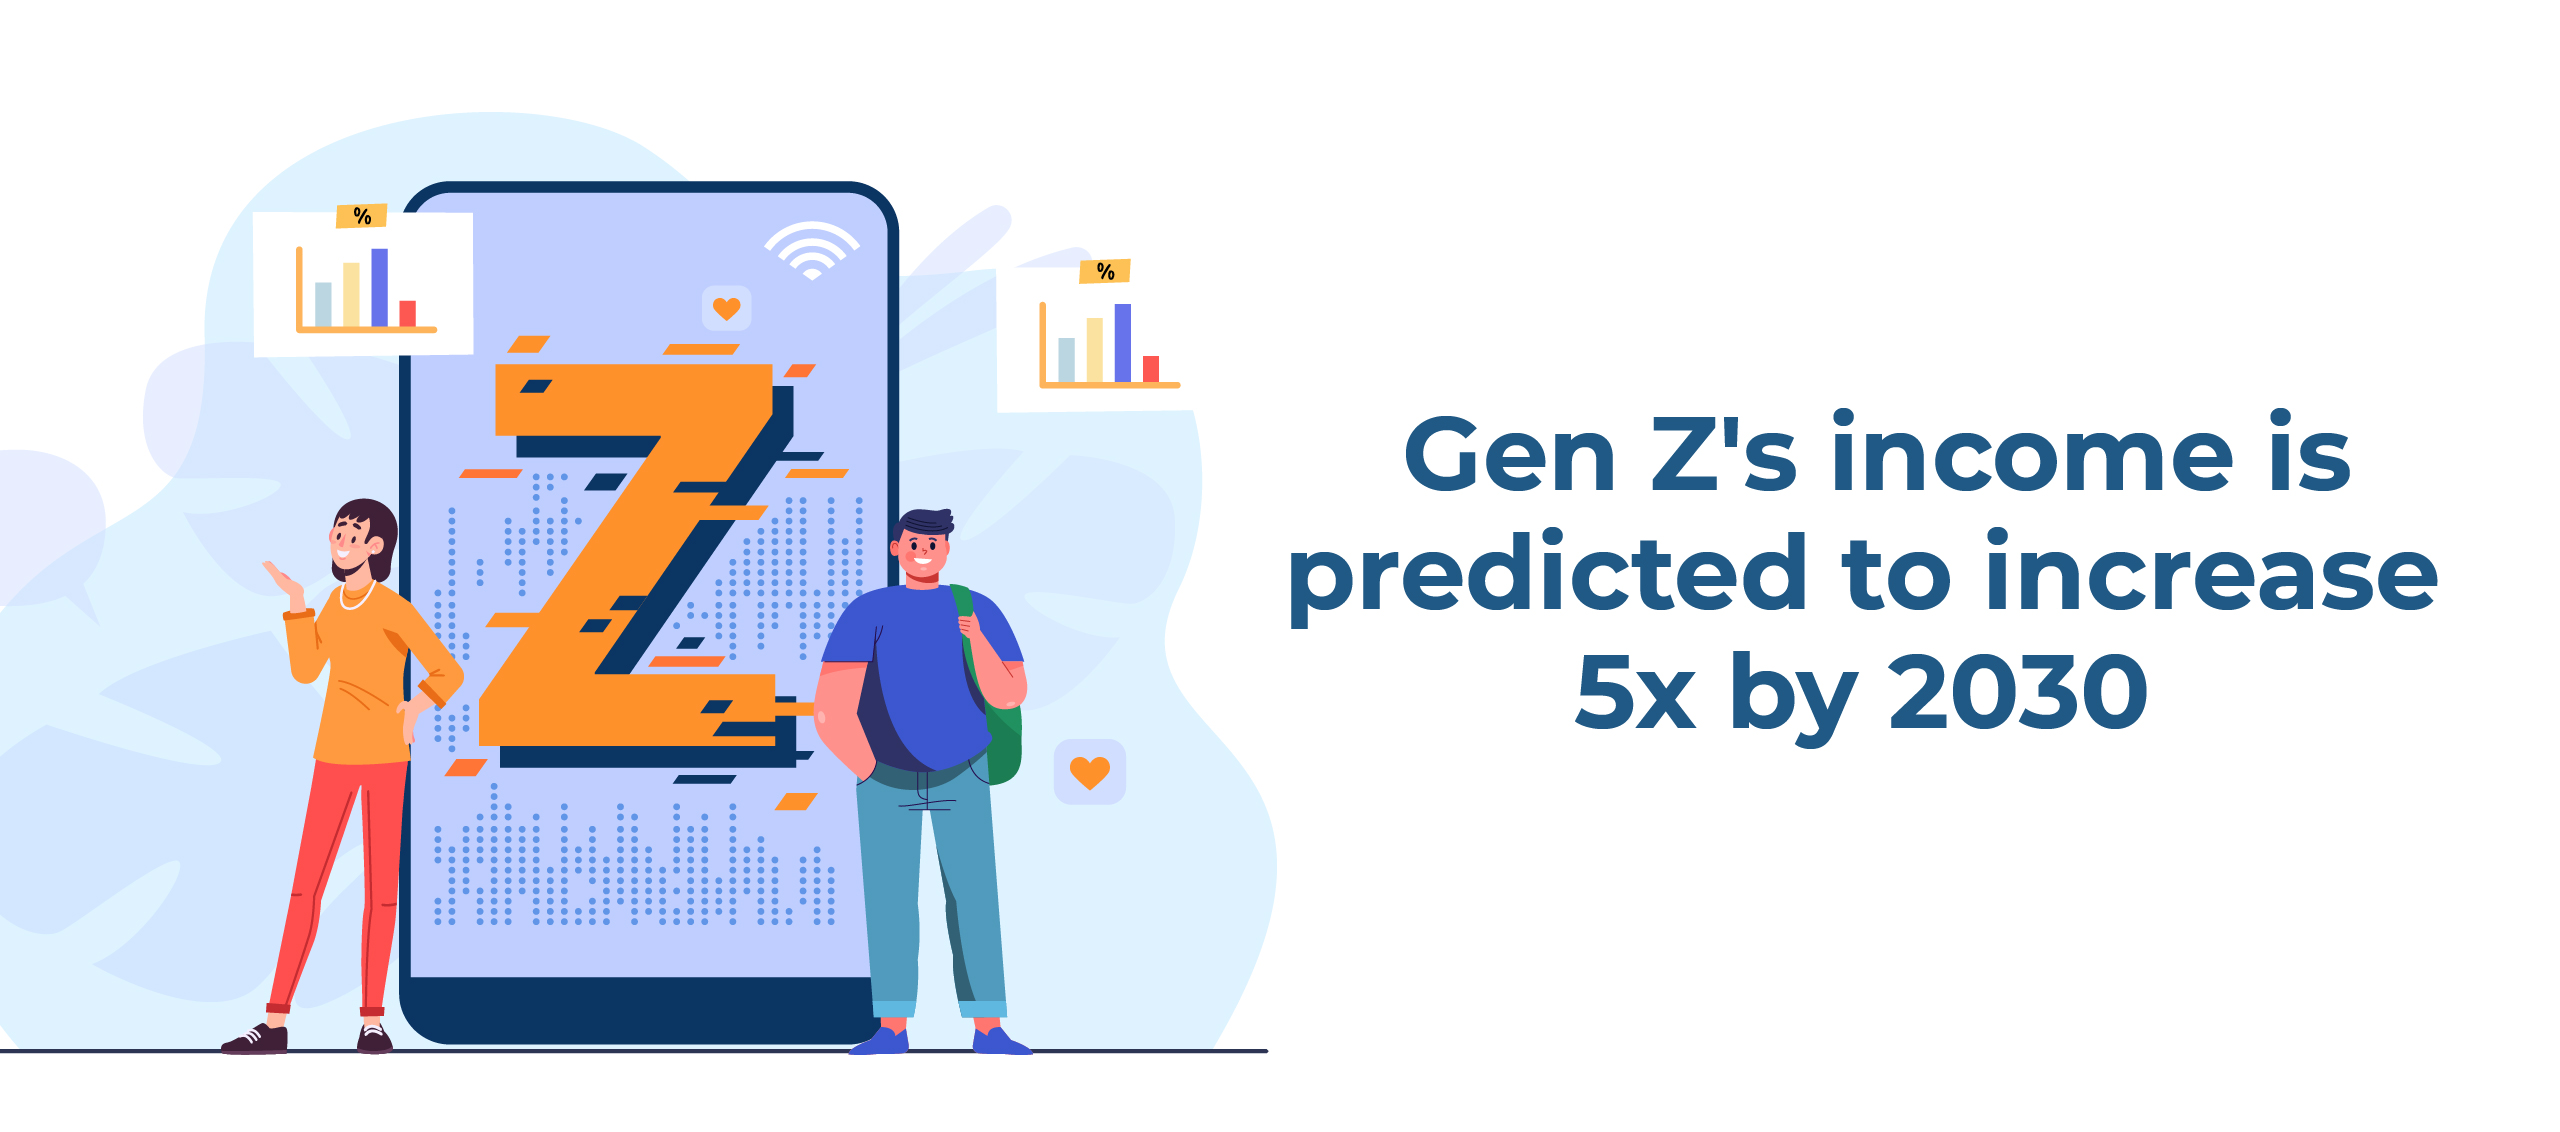 Gen Z's Income is predicted to grow 5x